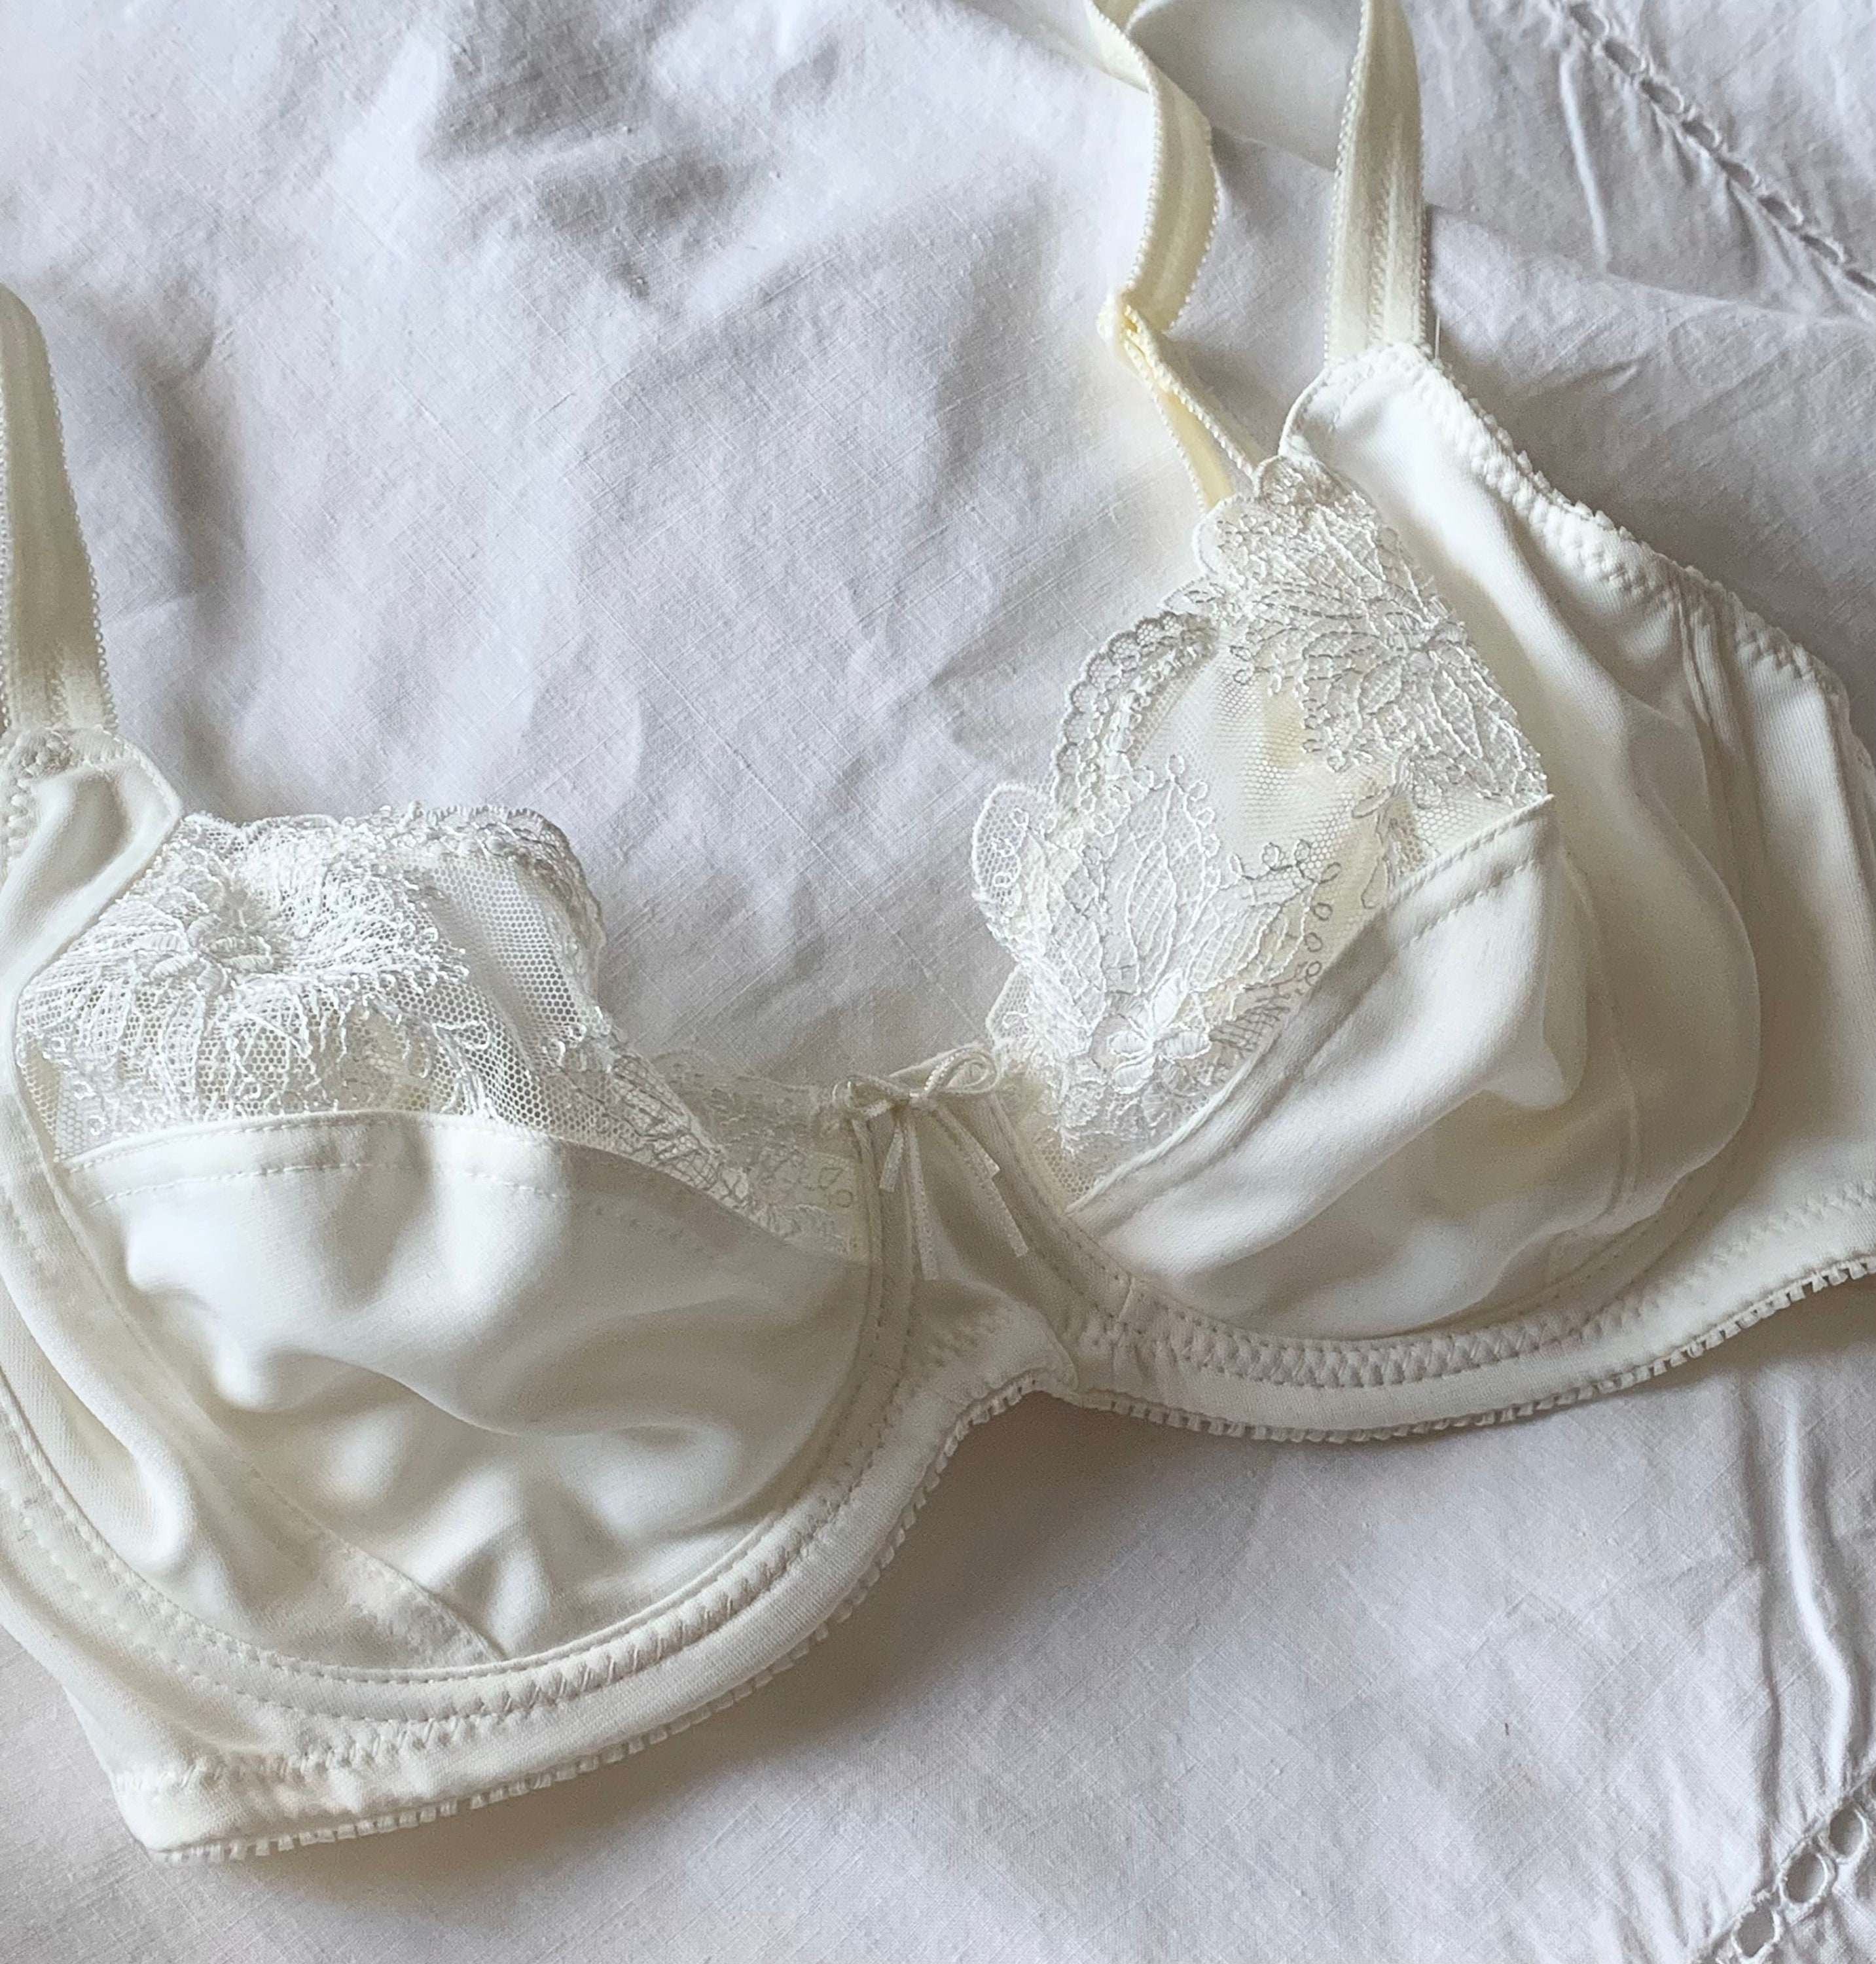 90s German Deadstock Delicate Lace Soft Cup Bra 34 B or 32 C - Etsy ...